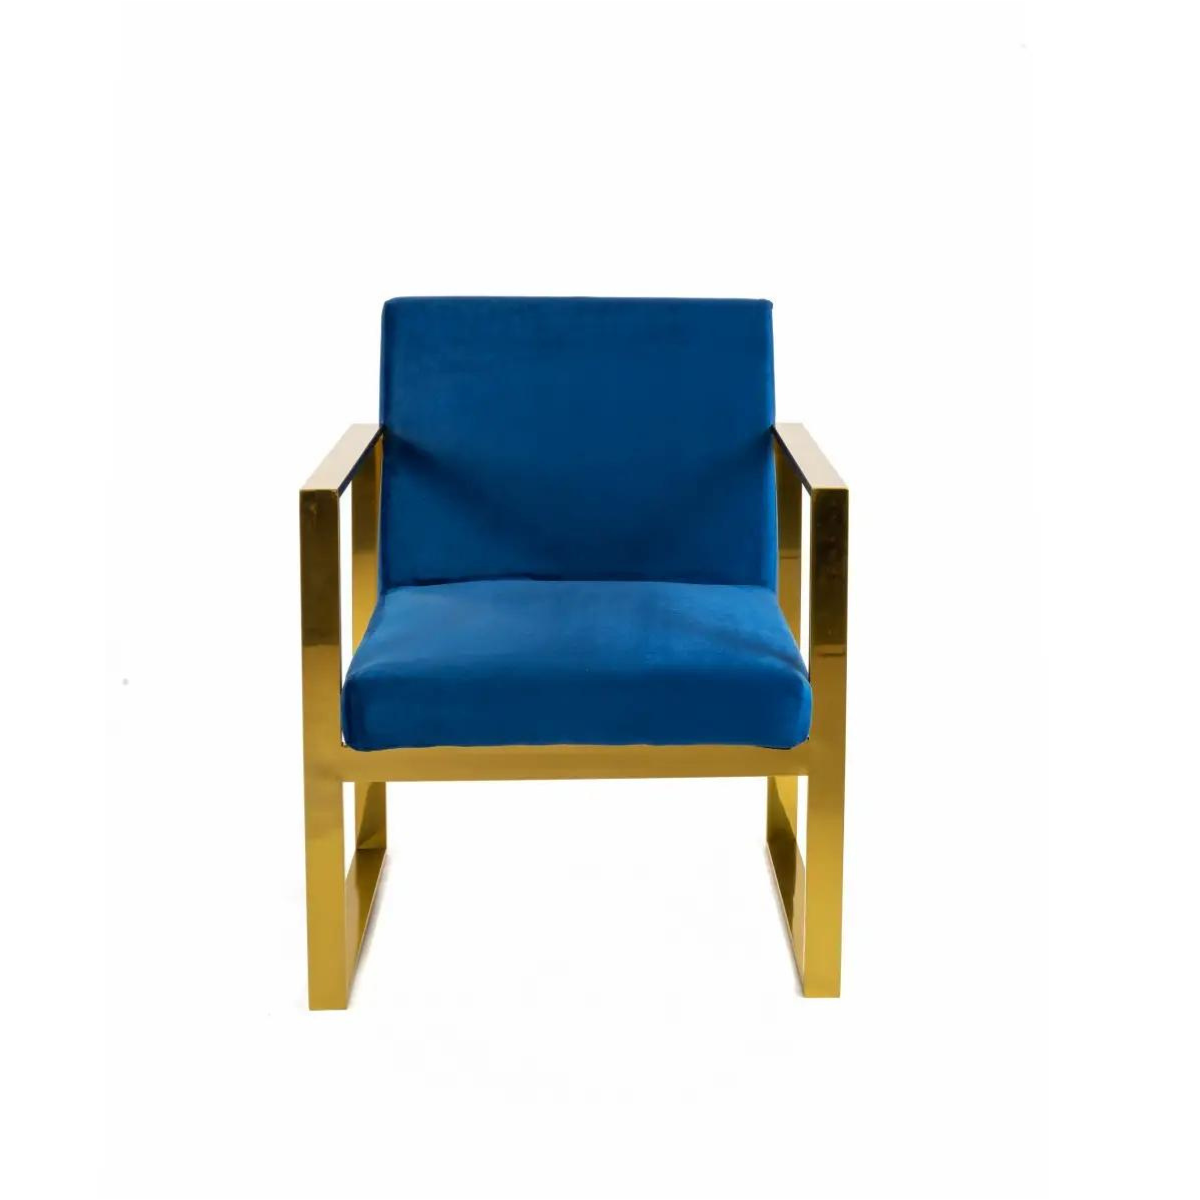 gold-navy-armchair-frontview